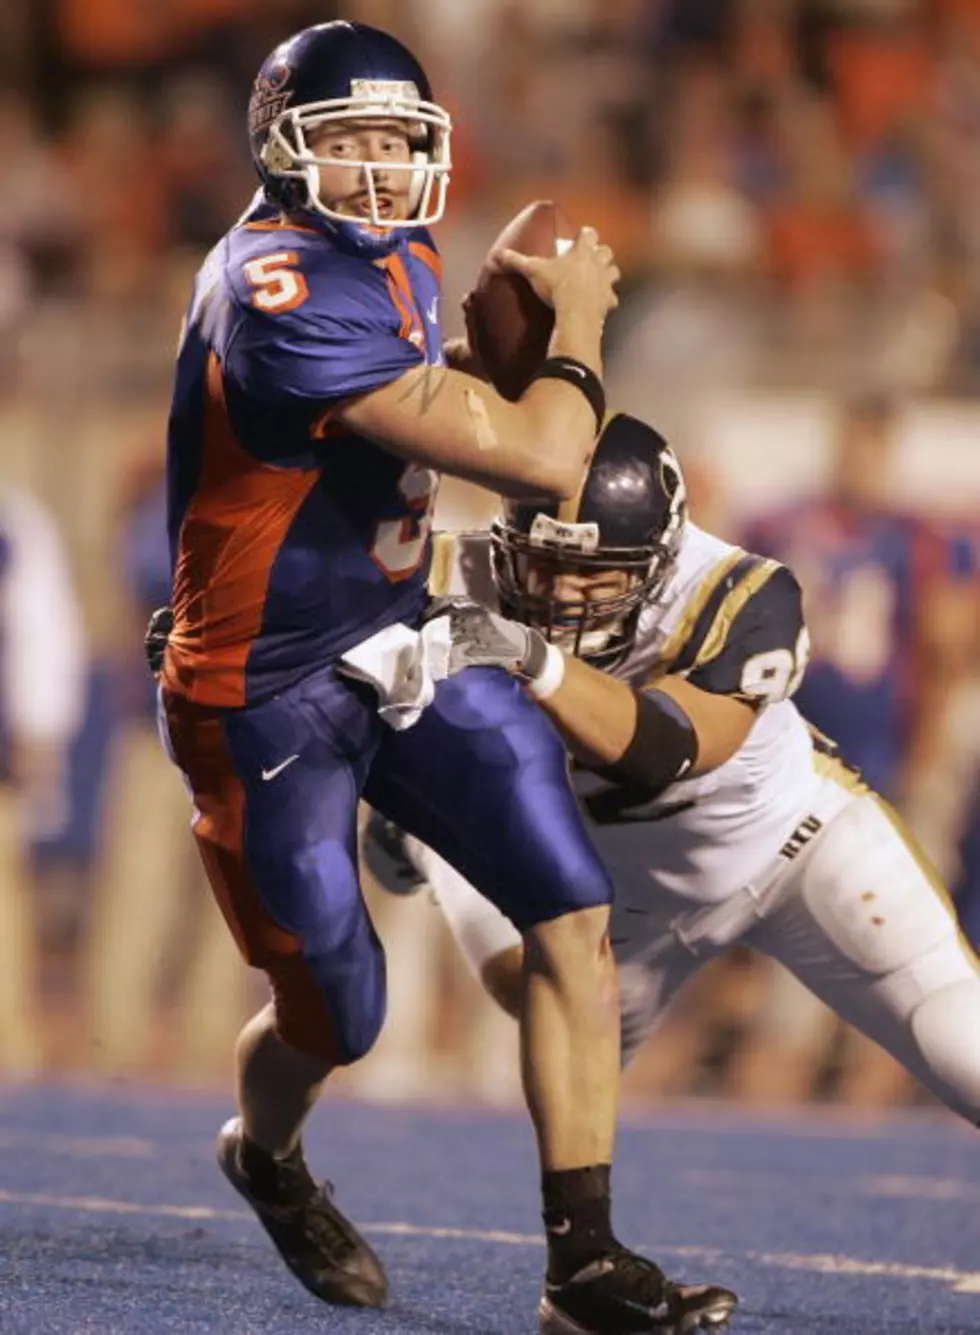 Hitch A Ride To Boise For $25 For This Friday’s BSU Football Game [10-24-14]